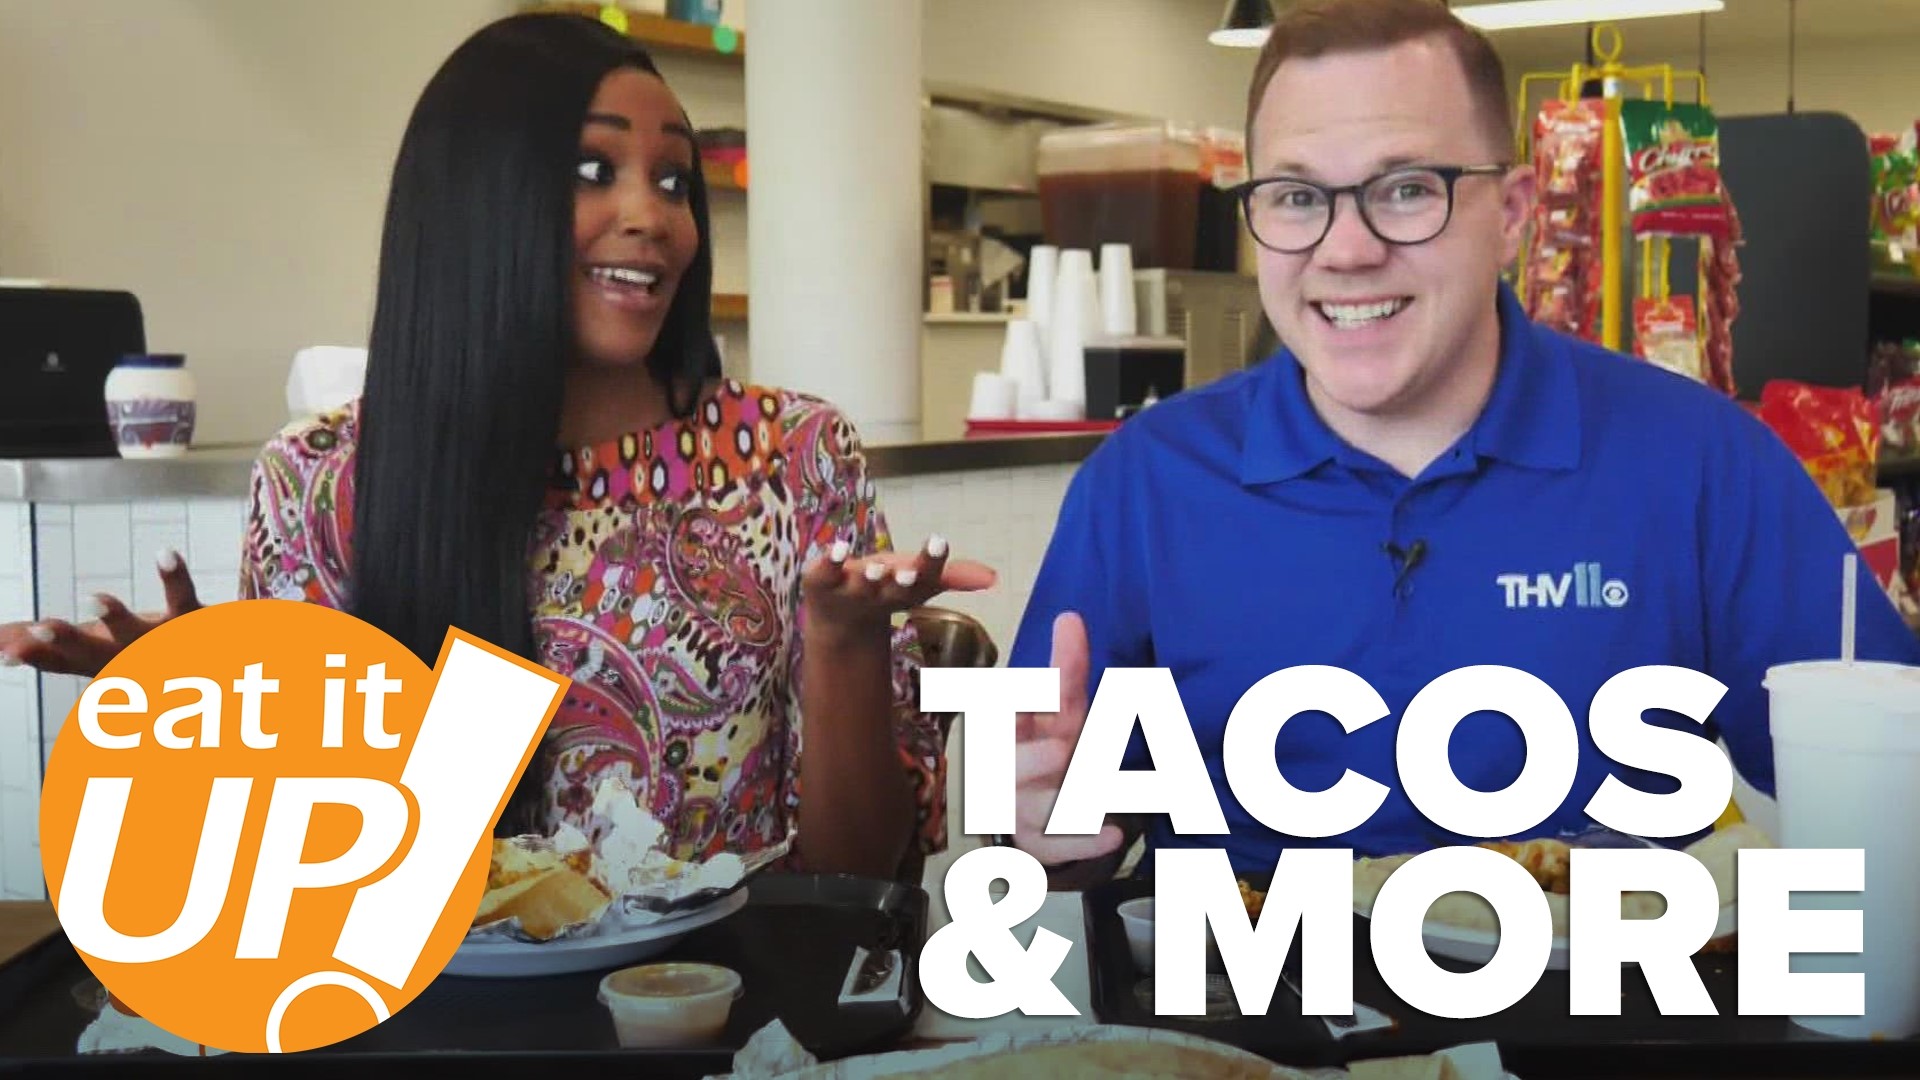 In this episode, Skot Covert and friends discover the best tacos, burritos, and more in Central Arkansas.